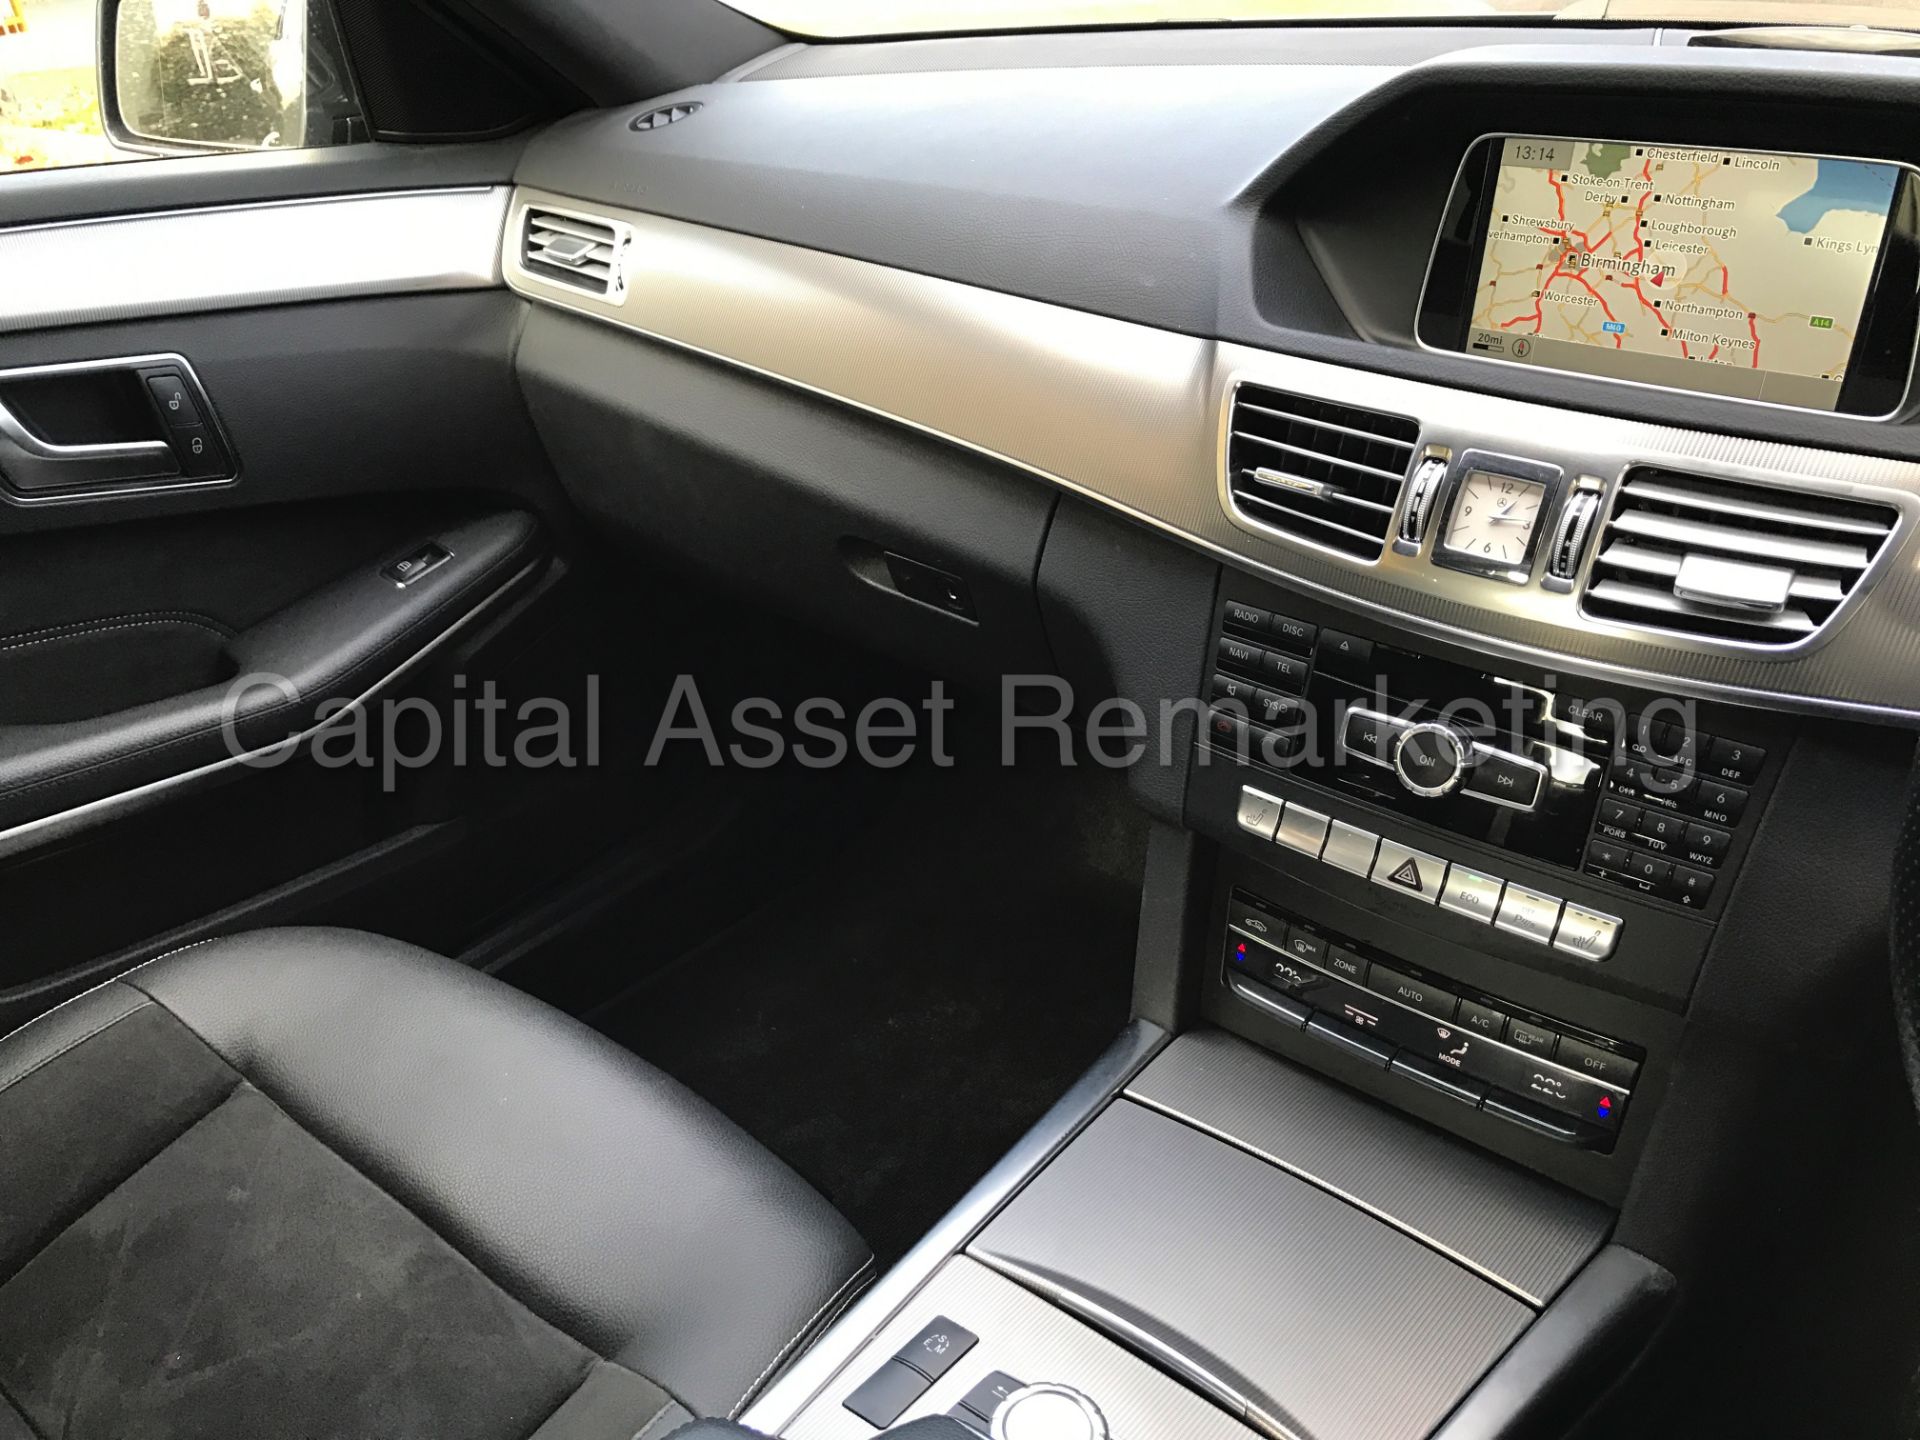 MERCEDES-BENZ E220 CDI 'AMG SPORT' (2014) 'SALOON - 7-G AUTO TIP-TRONIC - SAT NAV - LEATHER' *LOOK* - Image 23 of 26